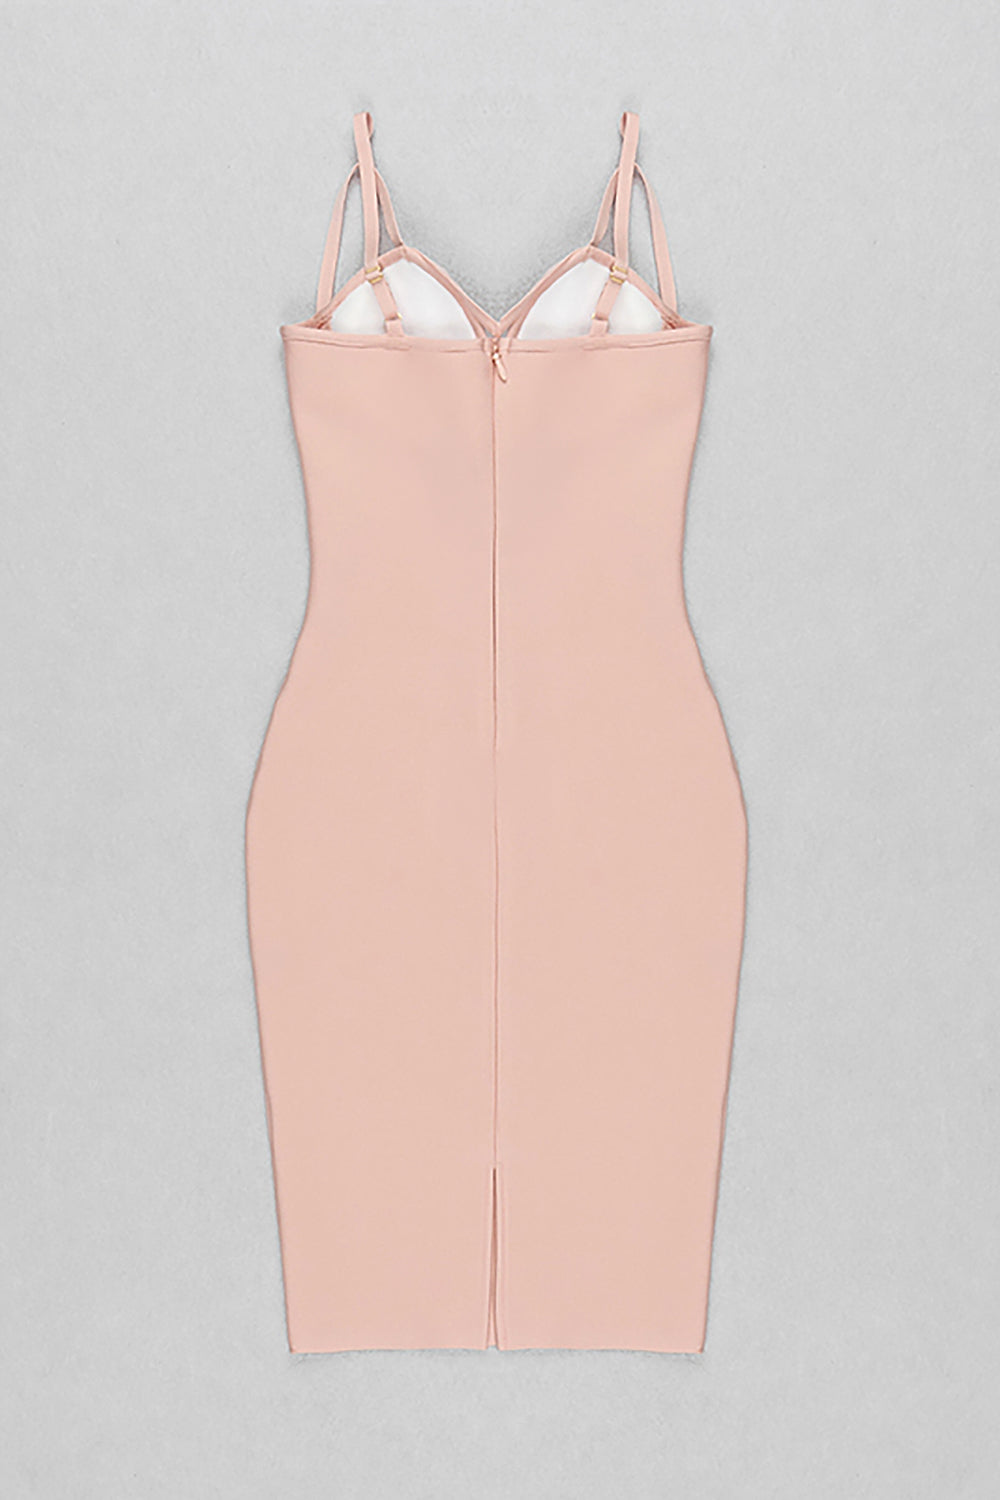 Nude Strappy Hollow Out Bandage Dress